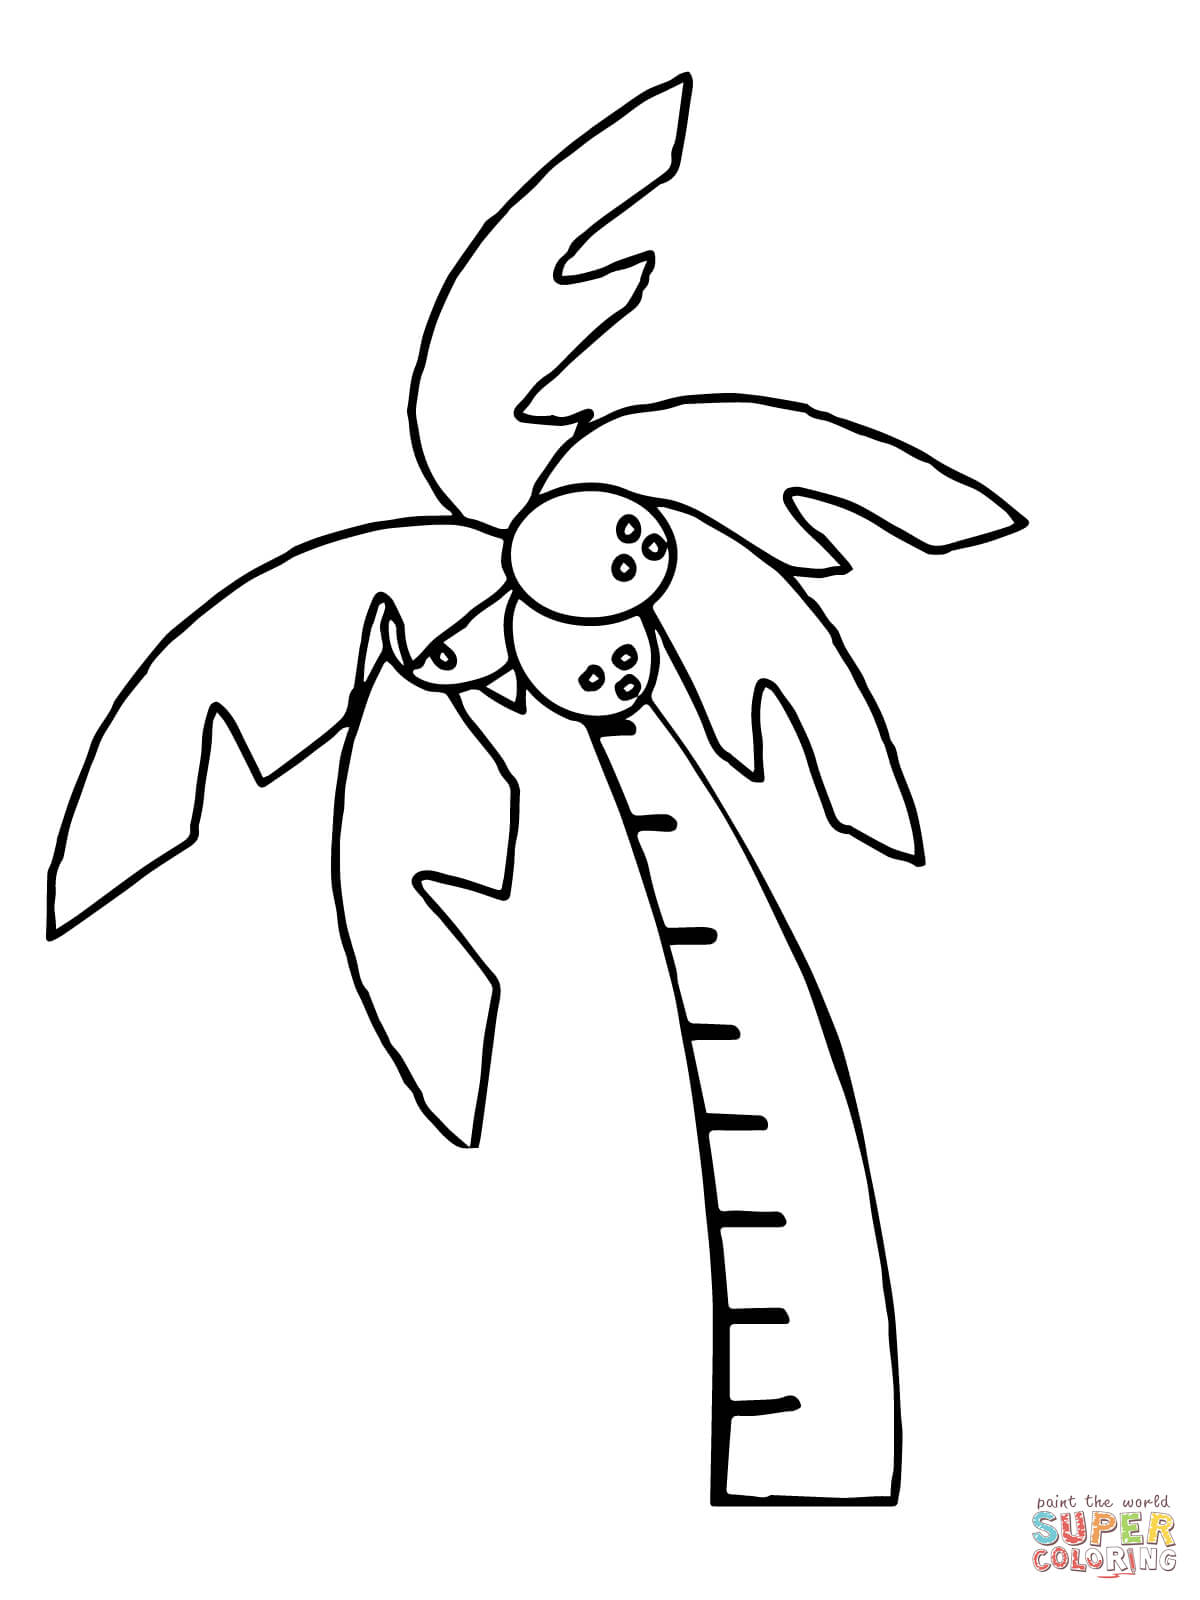     Boom Boom Palm Tree Coloring Page   Free Printable Coloring Pages